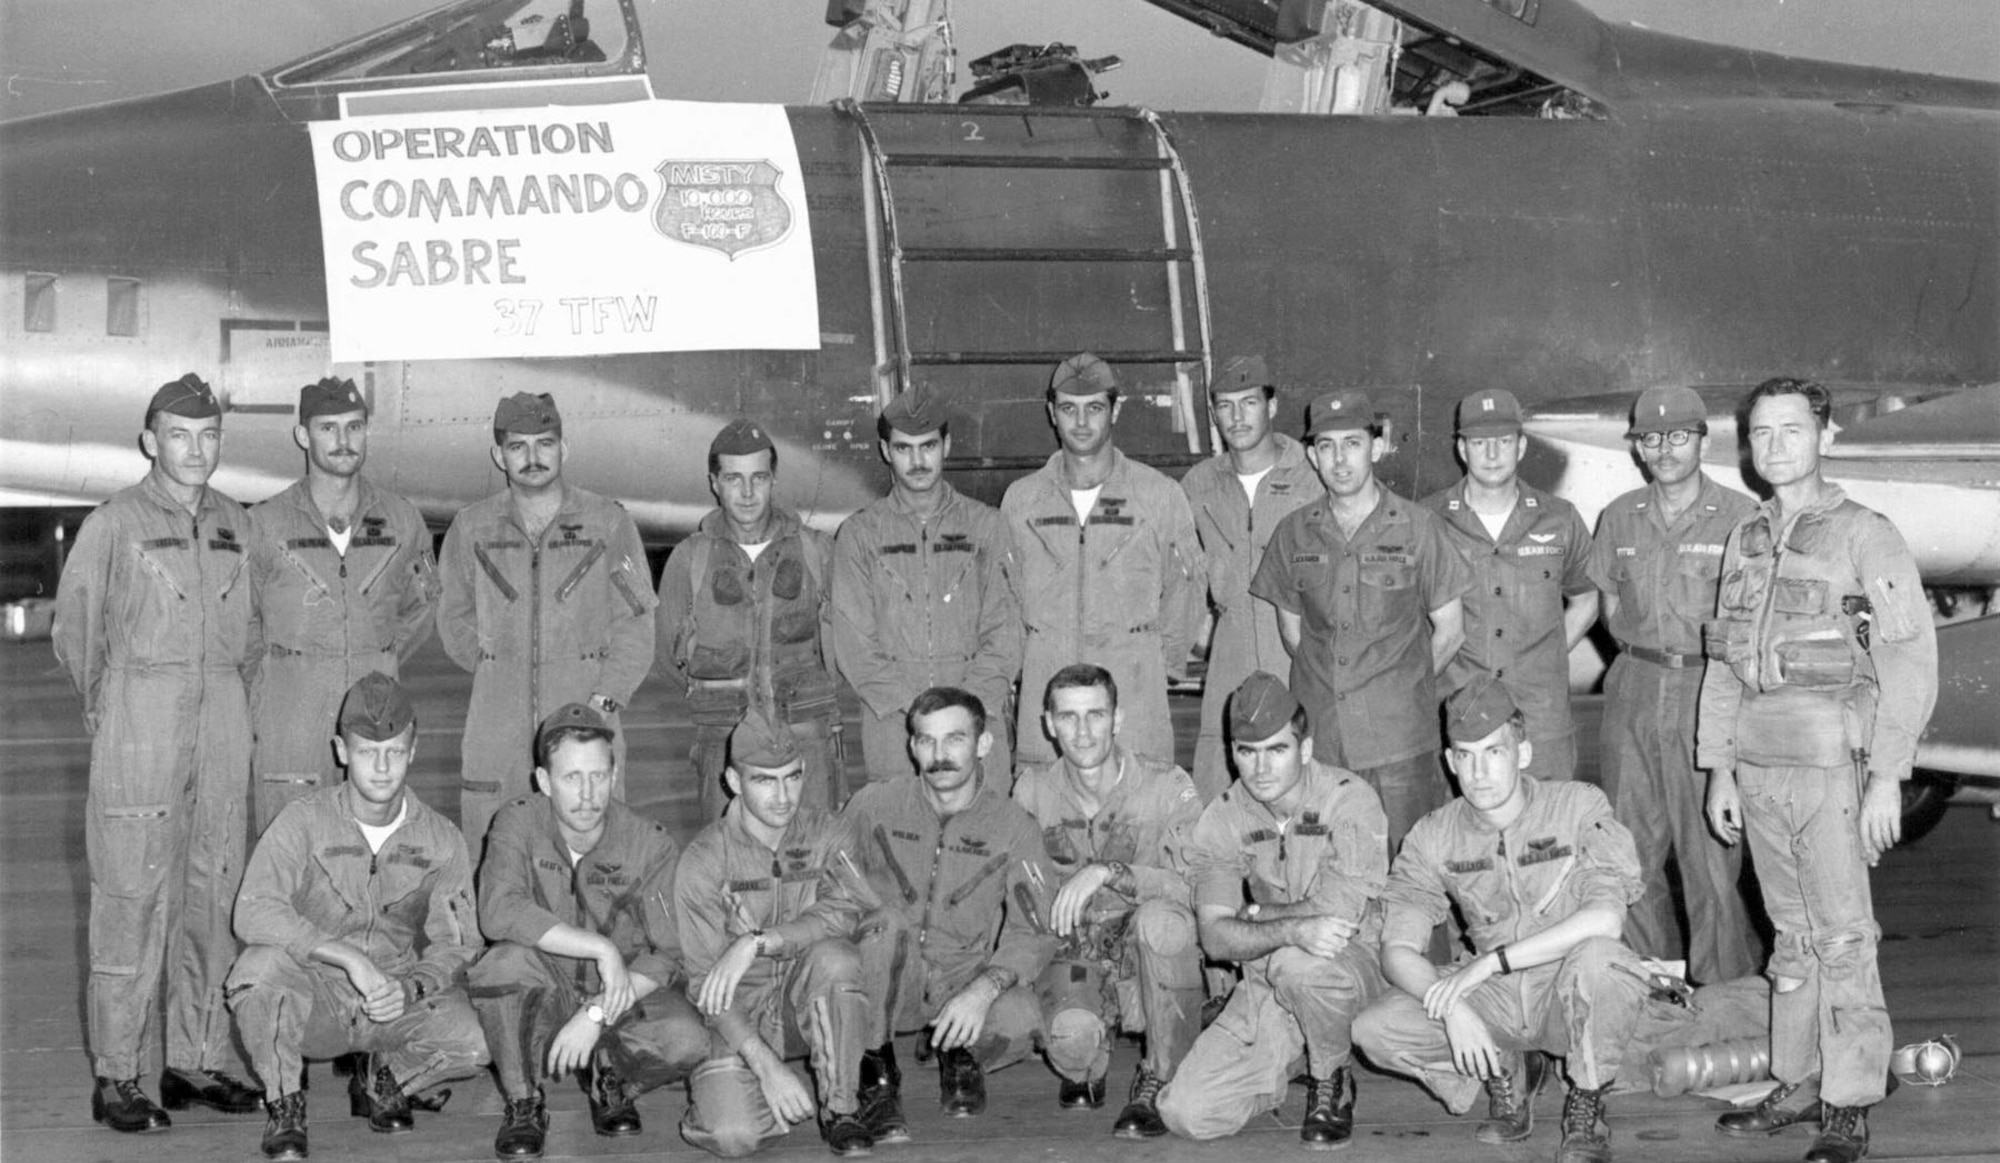 Misty FACs in 1969. Standing second from the left is Maj. Tony McPeak, who became the USAF Chief of Staff from 1990-1994. Standing third from the left is Capt. Ron Fogleman, who became USAF Chief of Staff from 1994-1997. Kneeling second from the right is 1st Lt. Charles Lacy Veach, who became an astronaut and logged more than 400 hours in space. (U.S. Air Force photo)